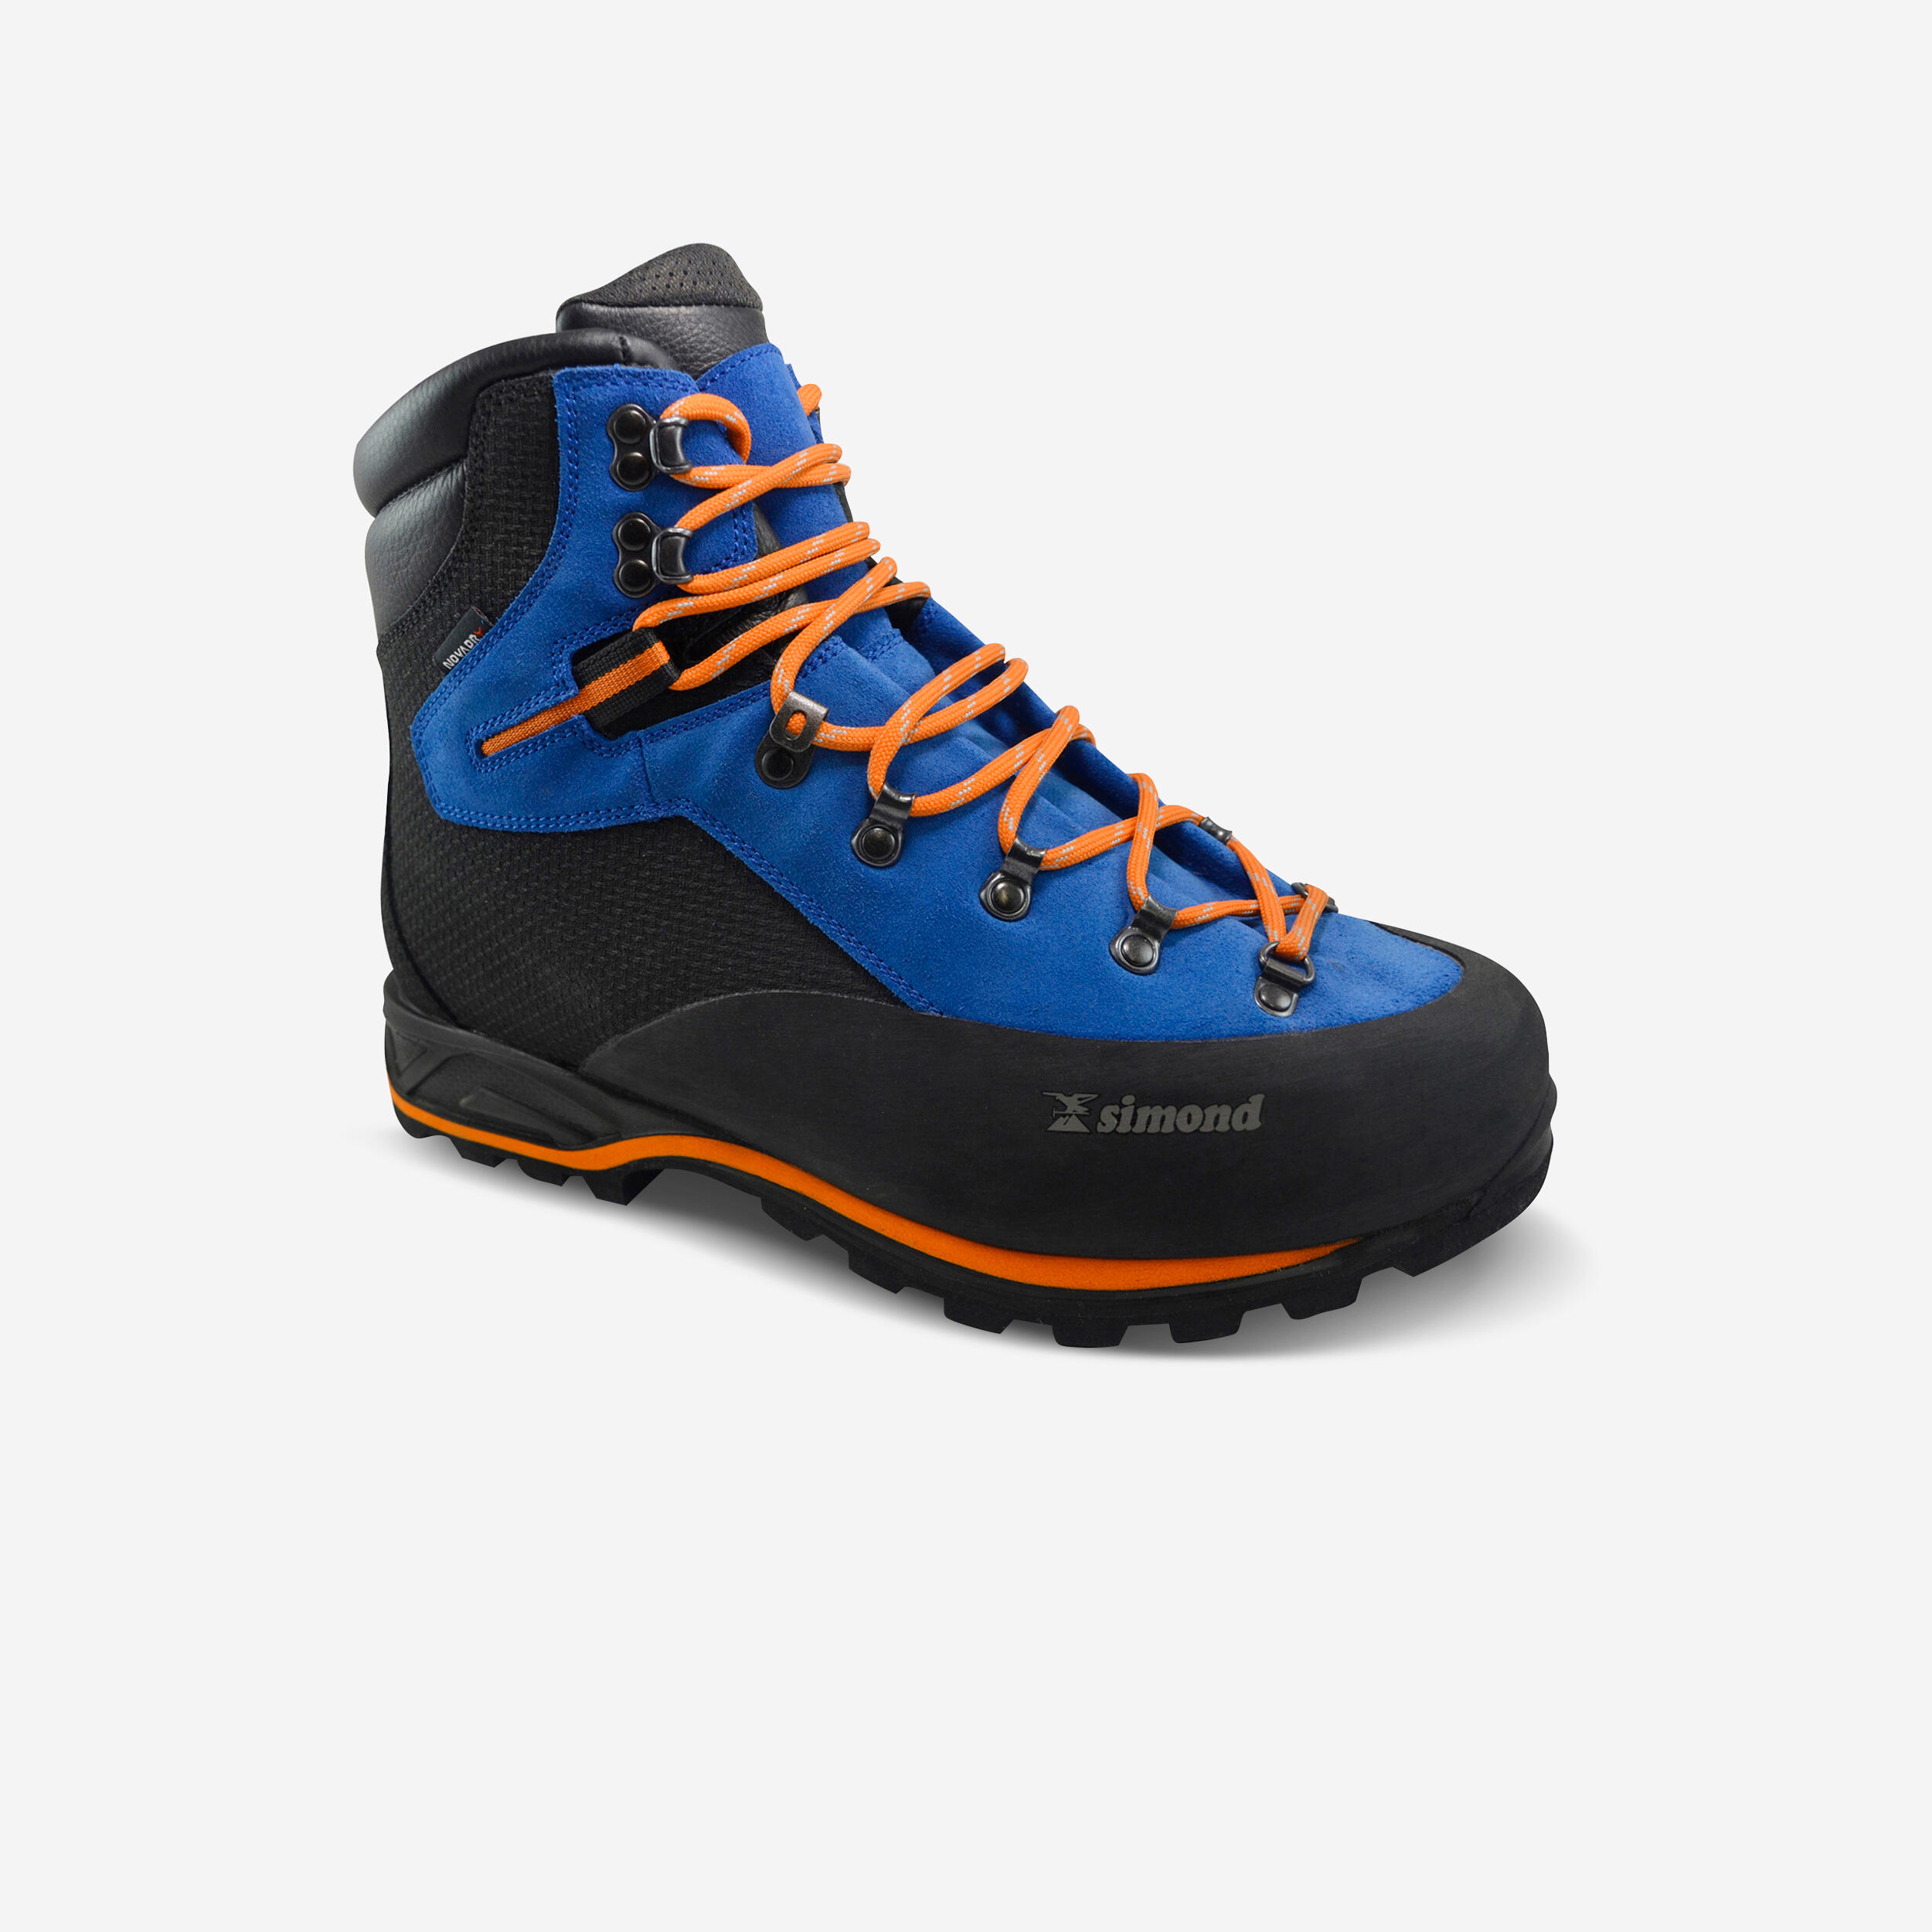 Mountaineering BOOTS - ALPINISM BLUE 1/5